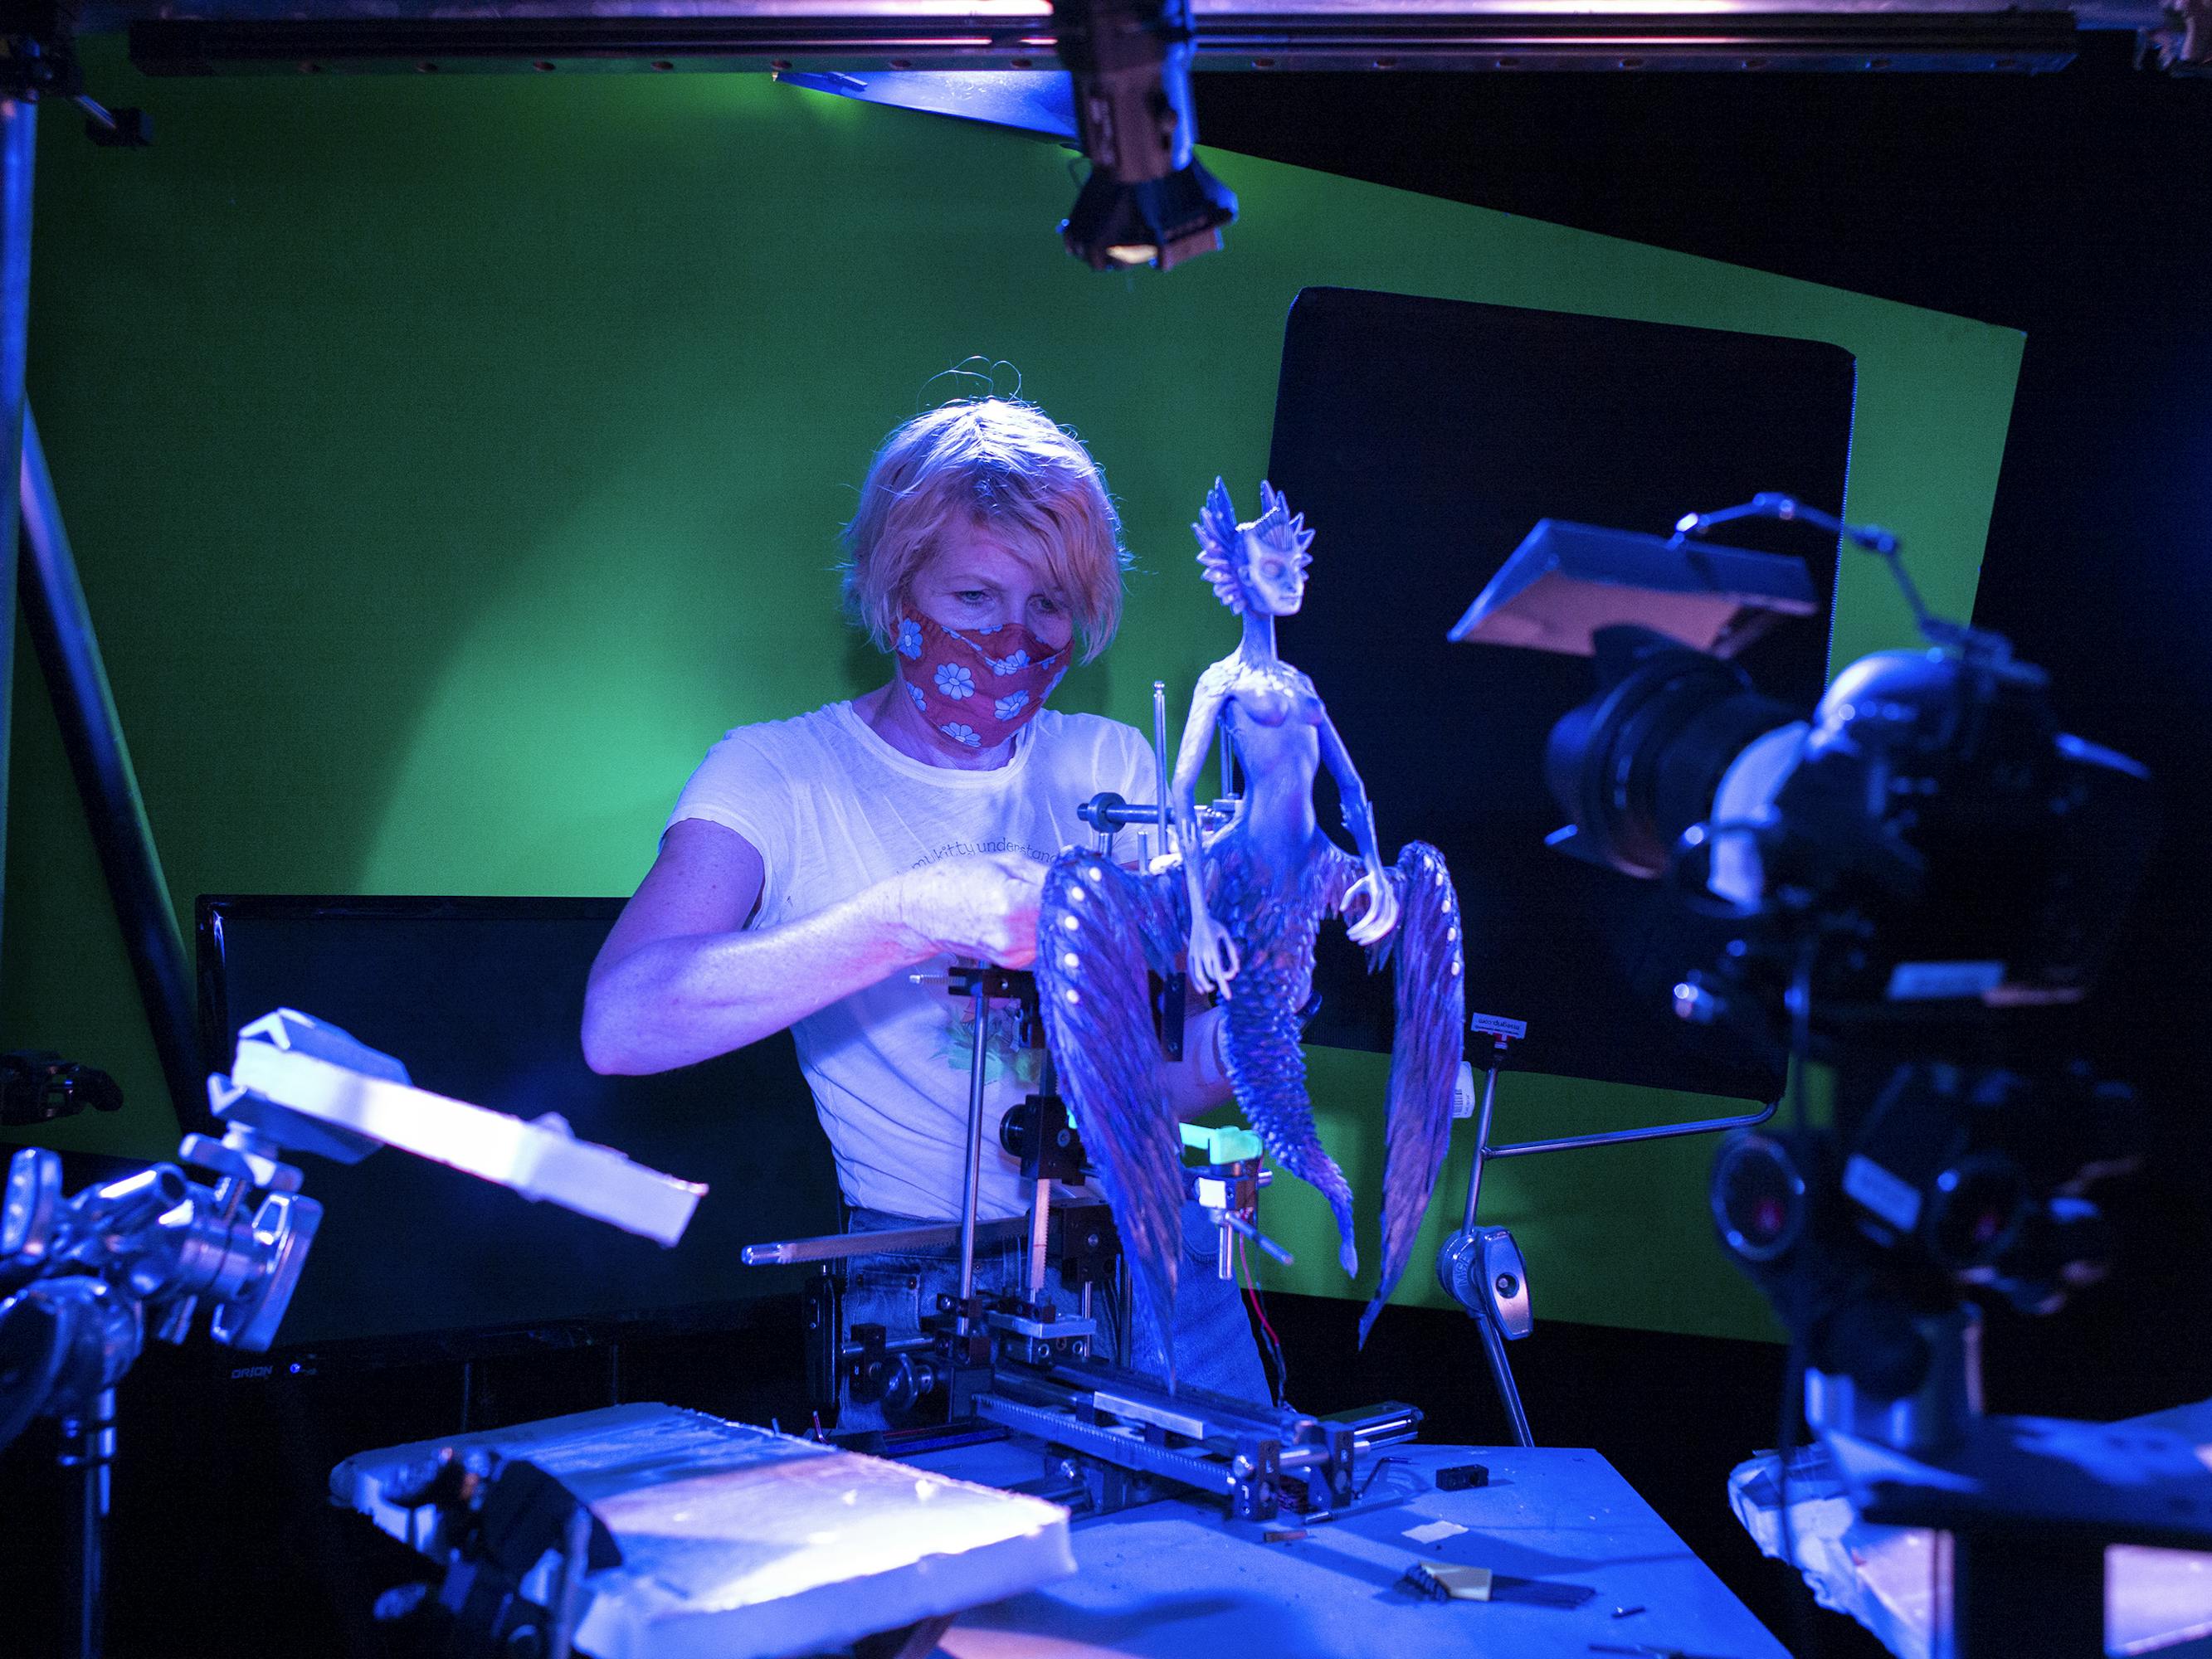 An artist works on a Death puppet in a blue lit studio with green walls